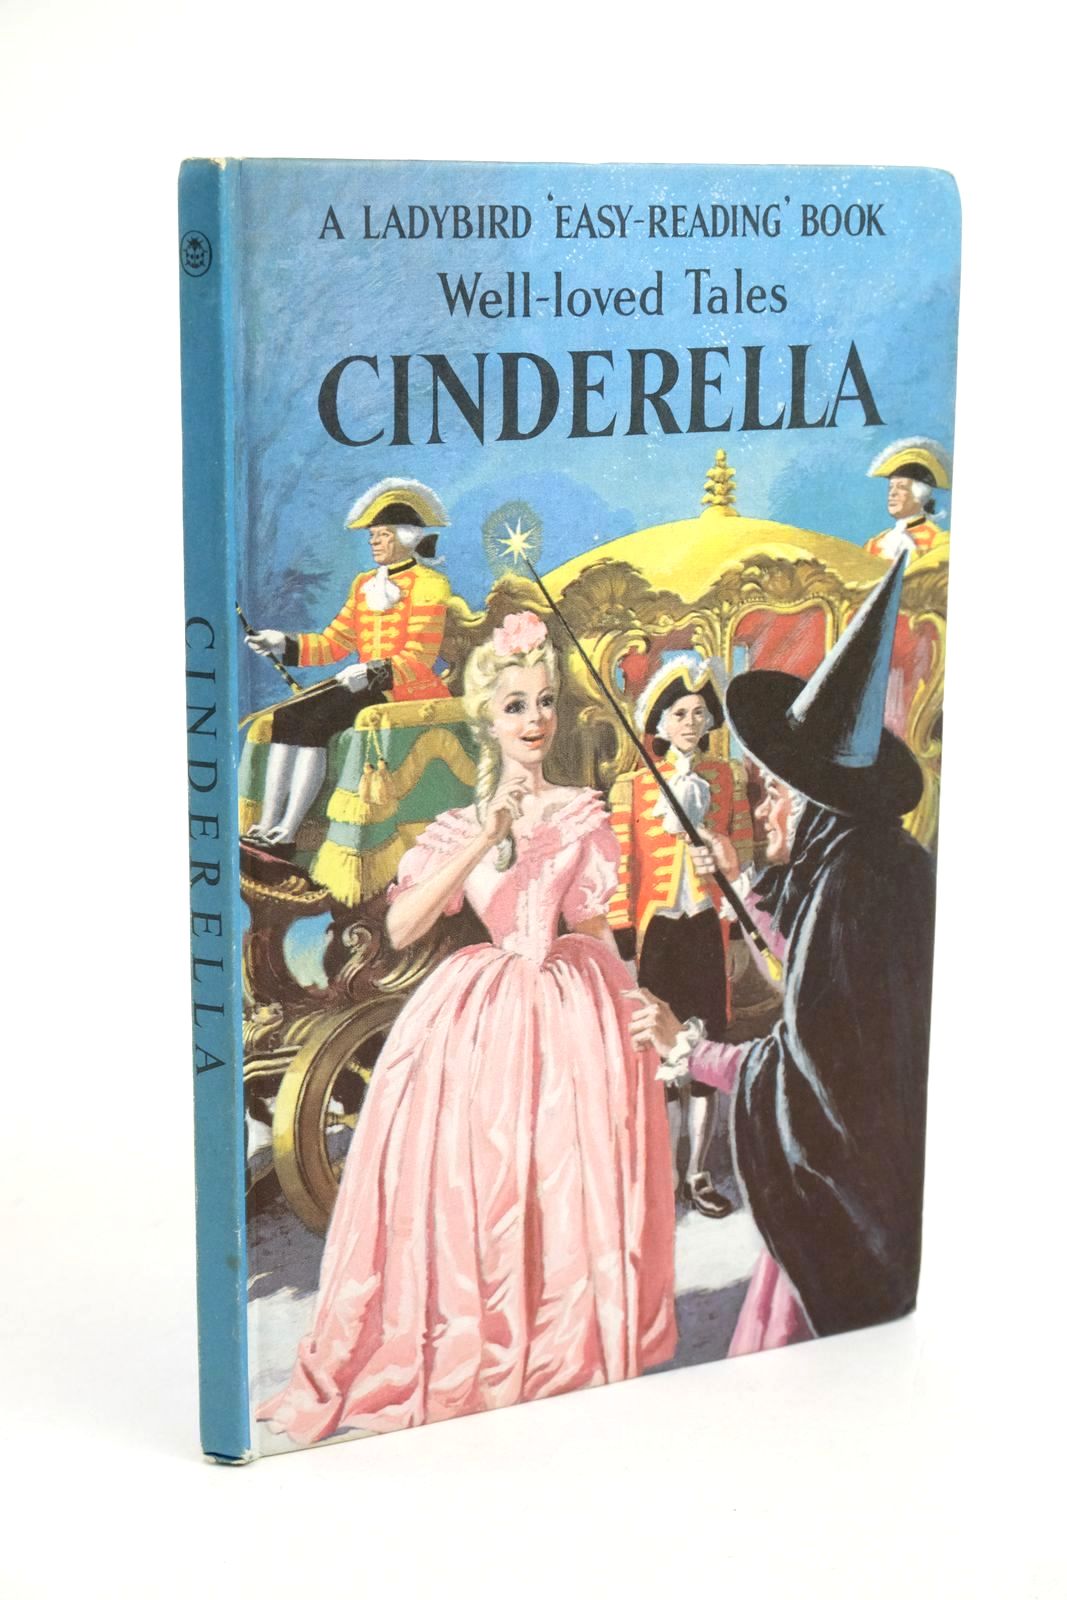 Photo of CINDERELLA written by Southgate, Vera illustrated by Winter, Eric published by Wills &amp; Hepworth Ltd. (STOCK CODE: 1322103)  for sale by Stella & Rose's Books